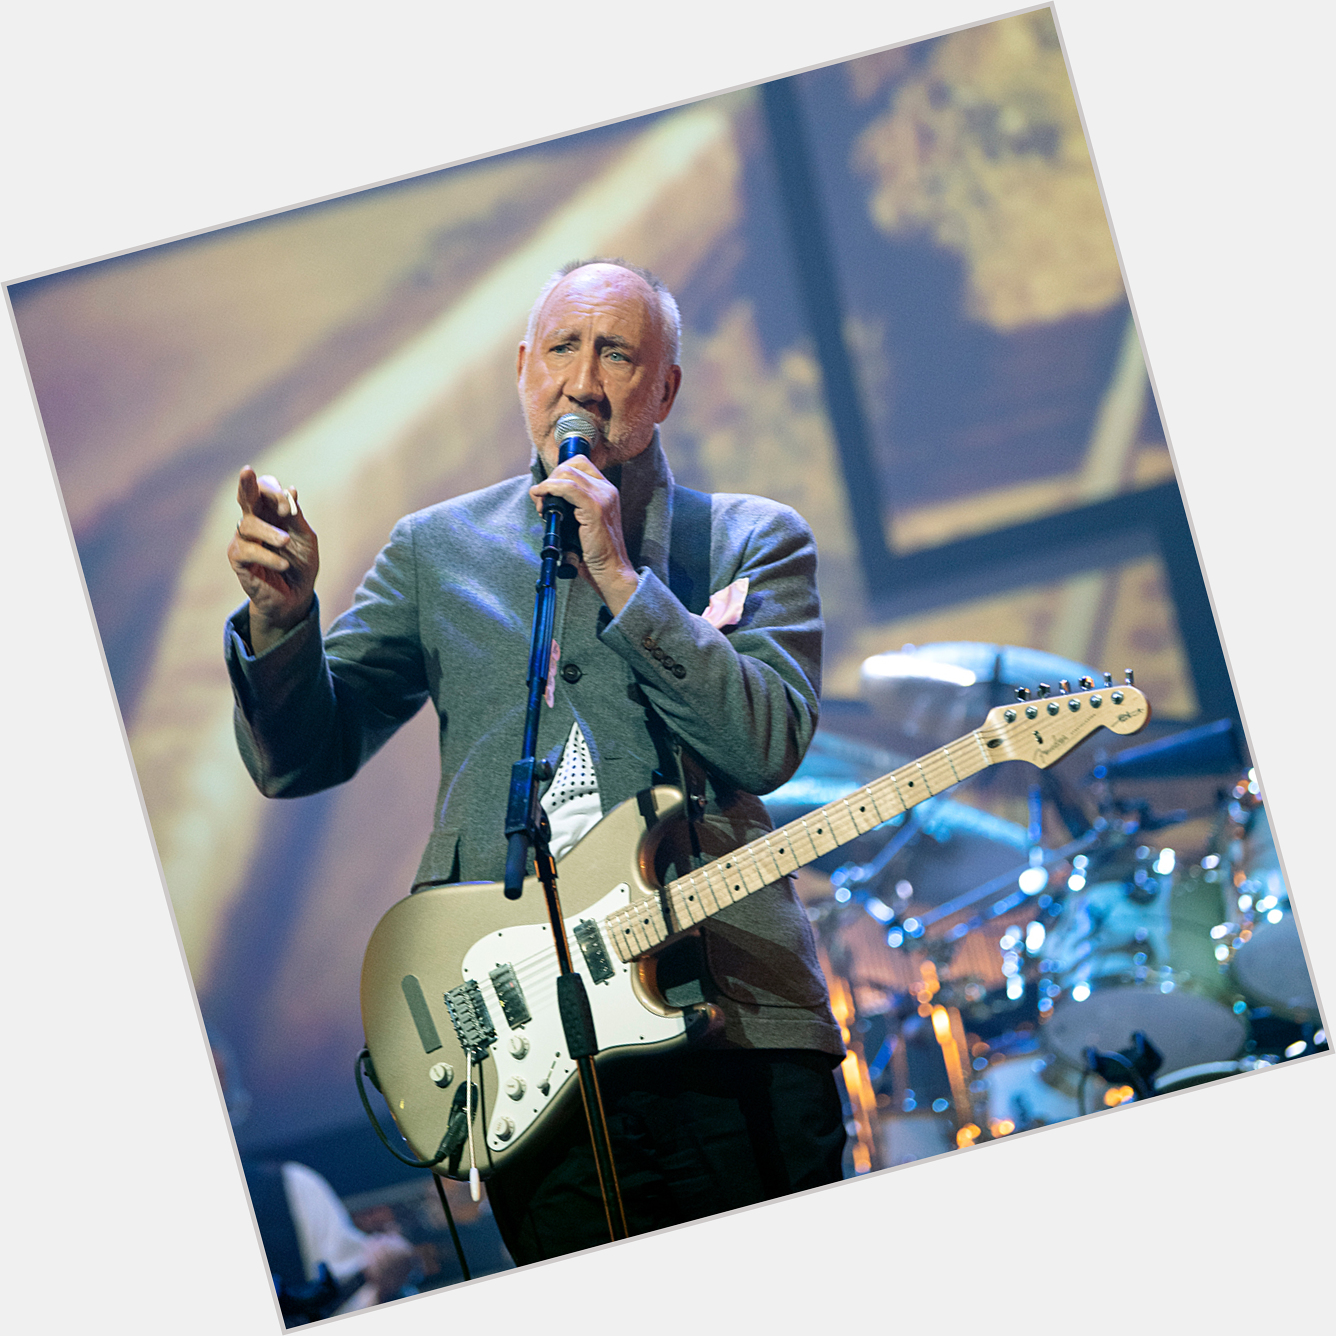 Happy birthday Pete Townshend - 75 years old today!! Stay strong and healthy, Pete x 